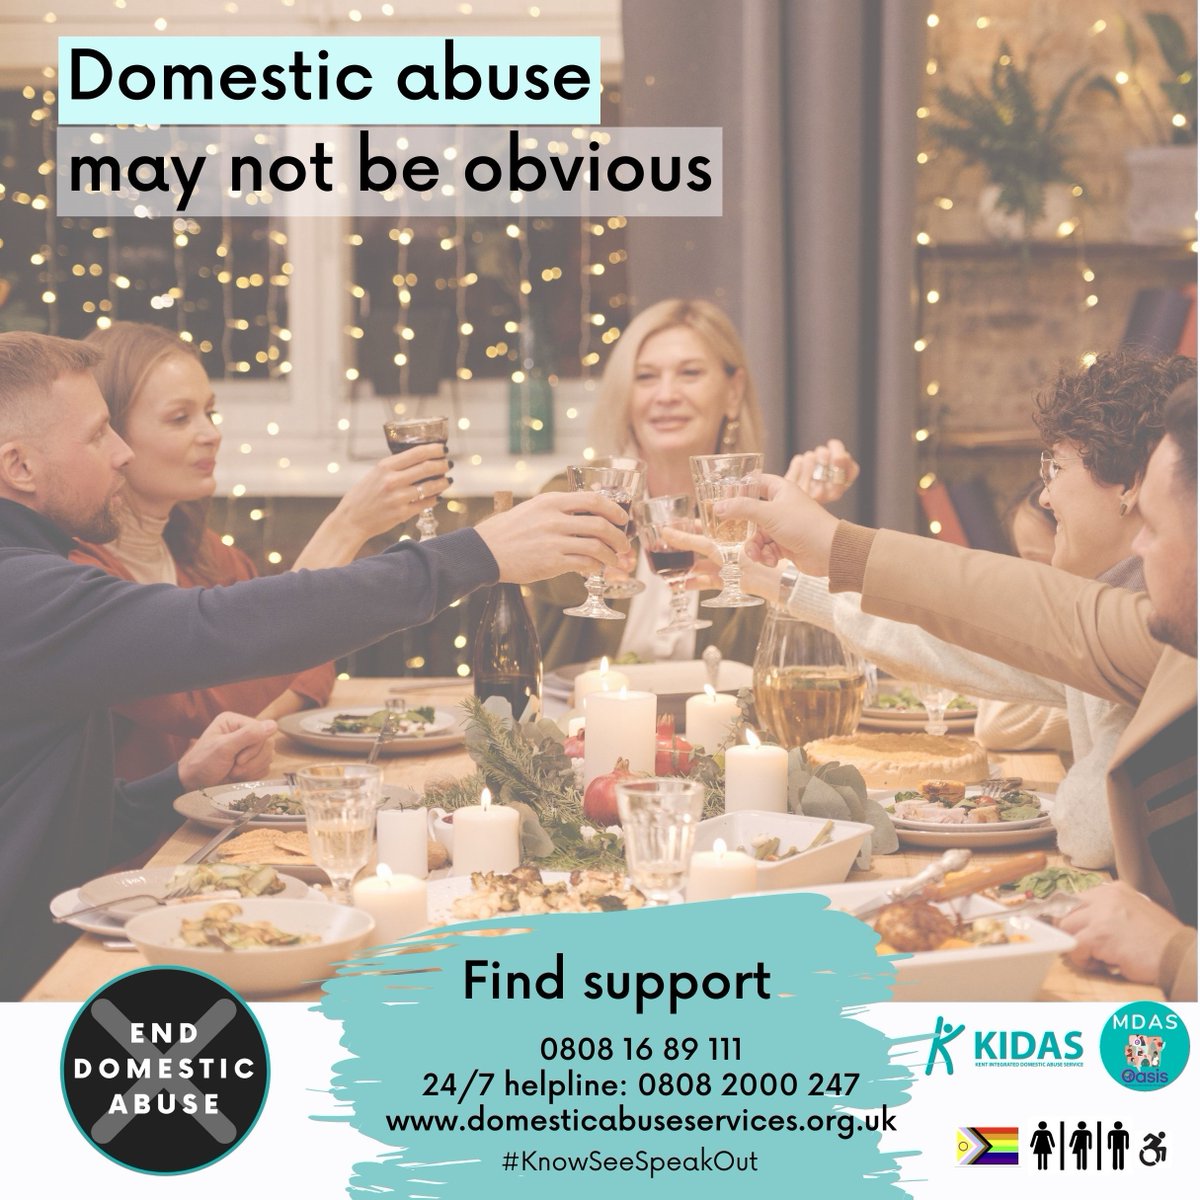 Behind the smiles this #Christmas the reality could be that someone you know is experiencing #DomesticAbuse. The signs aren't always visible. Take a moment to check if someone is really ok. #KnowSeeSpeakOut #EndDomesticAbuse